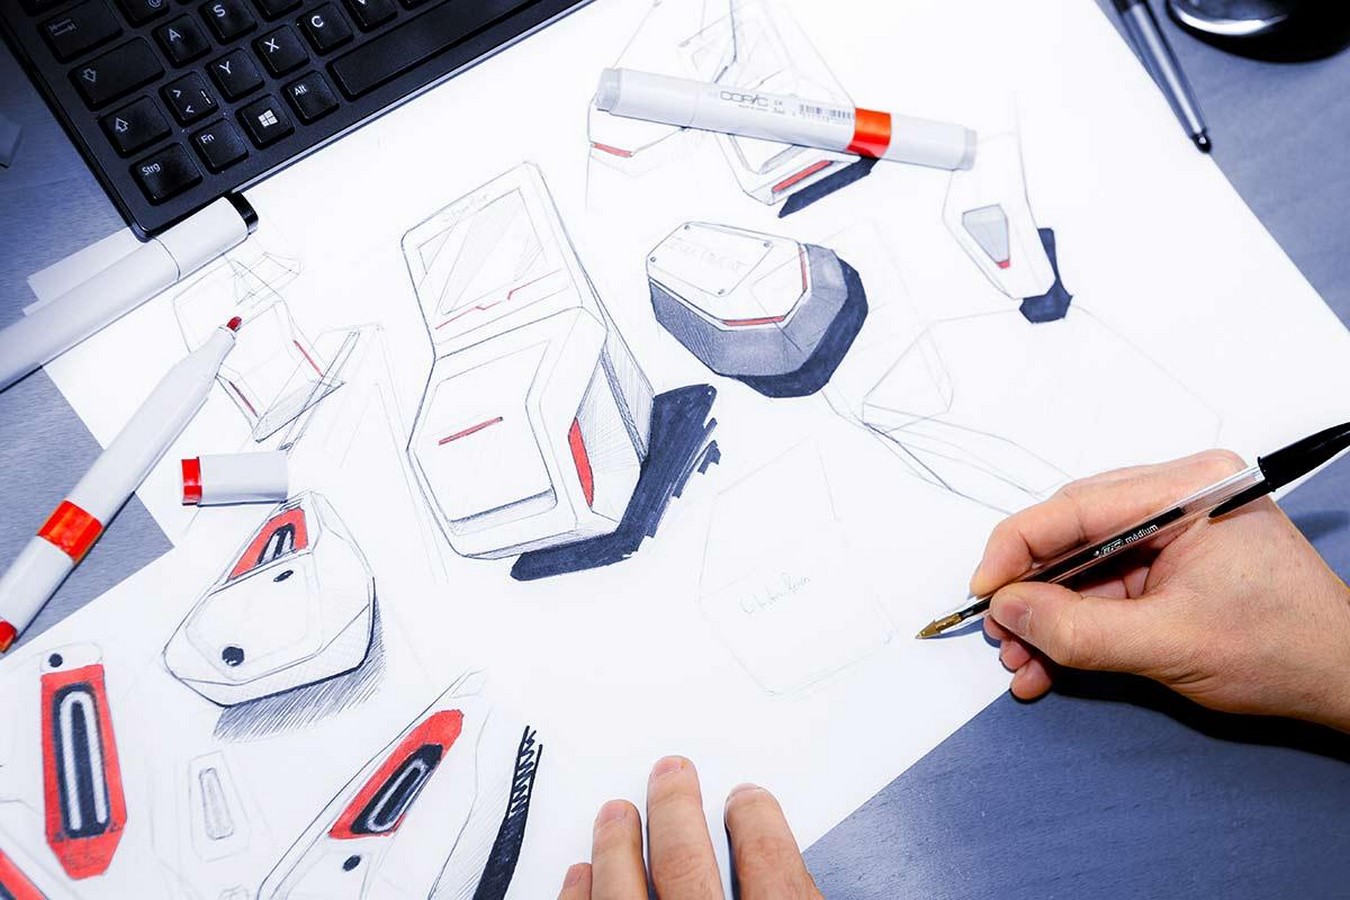 Manufacturing Design Courses – All You Should Know